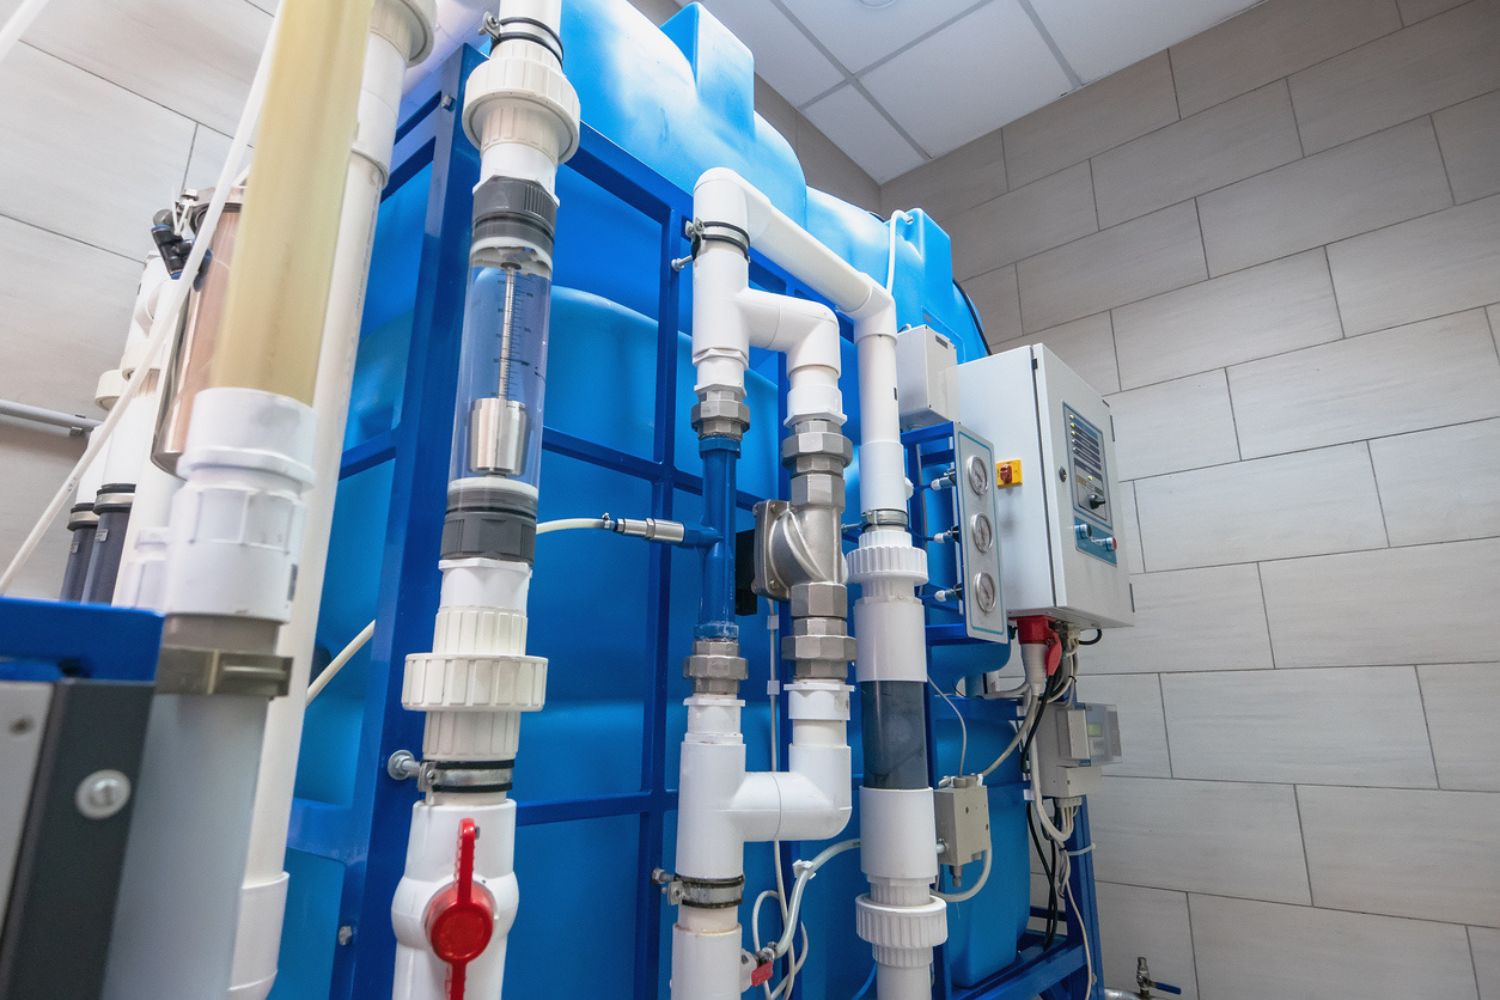 How Much Does a Whole-House Reverse Osmosis System Cost?